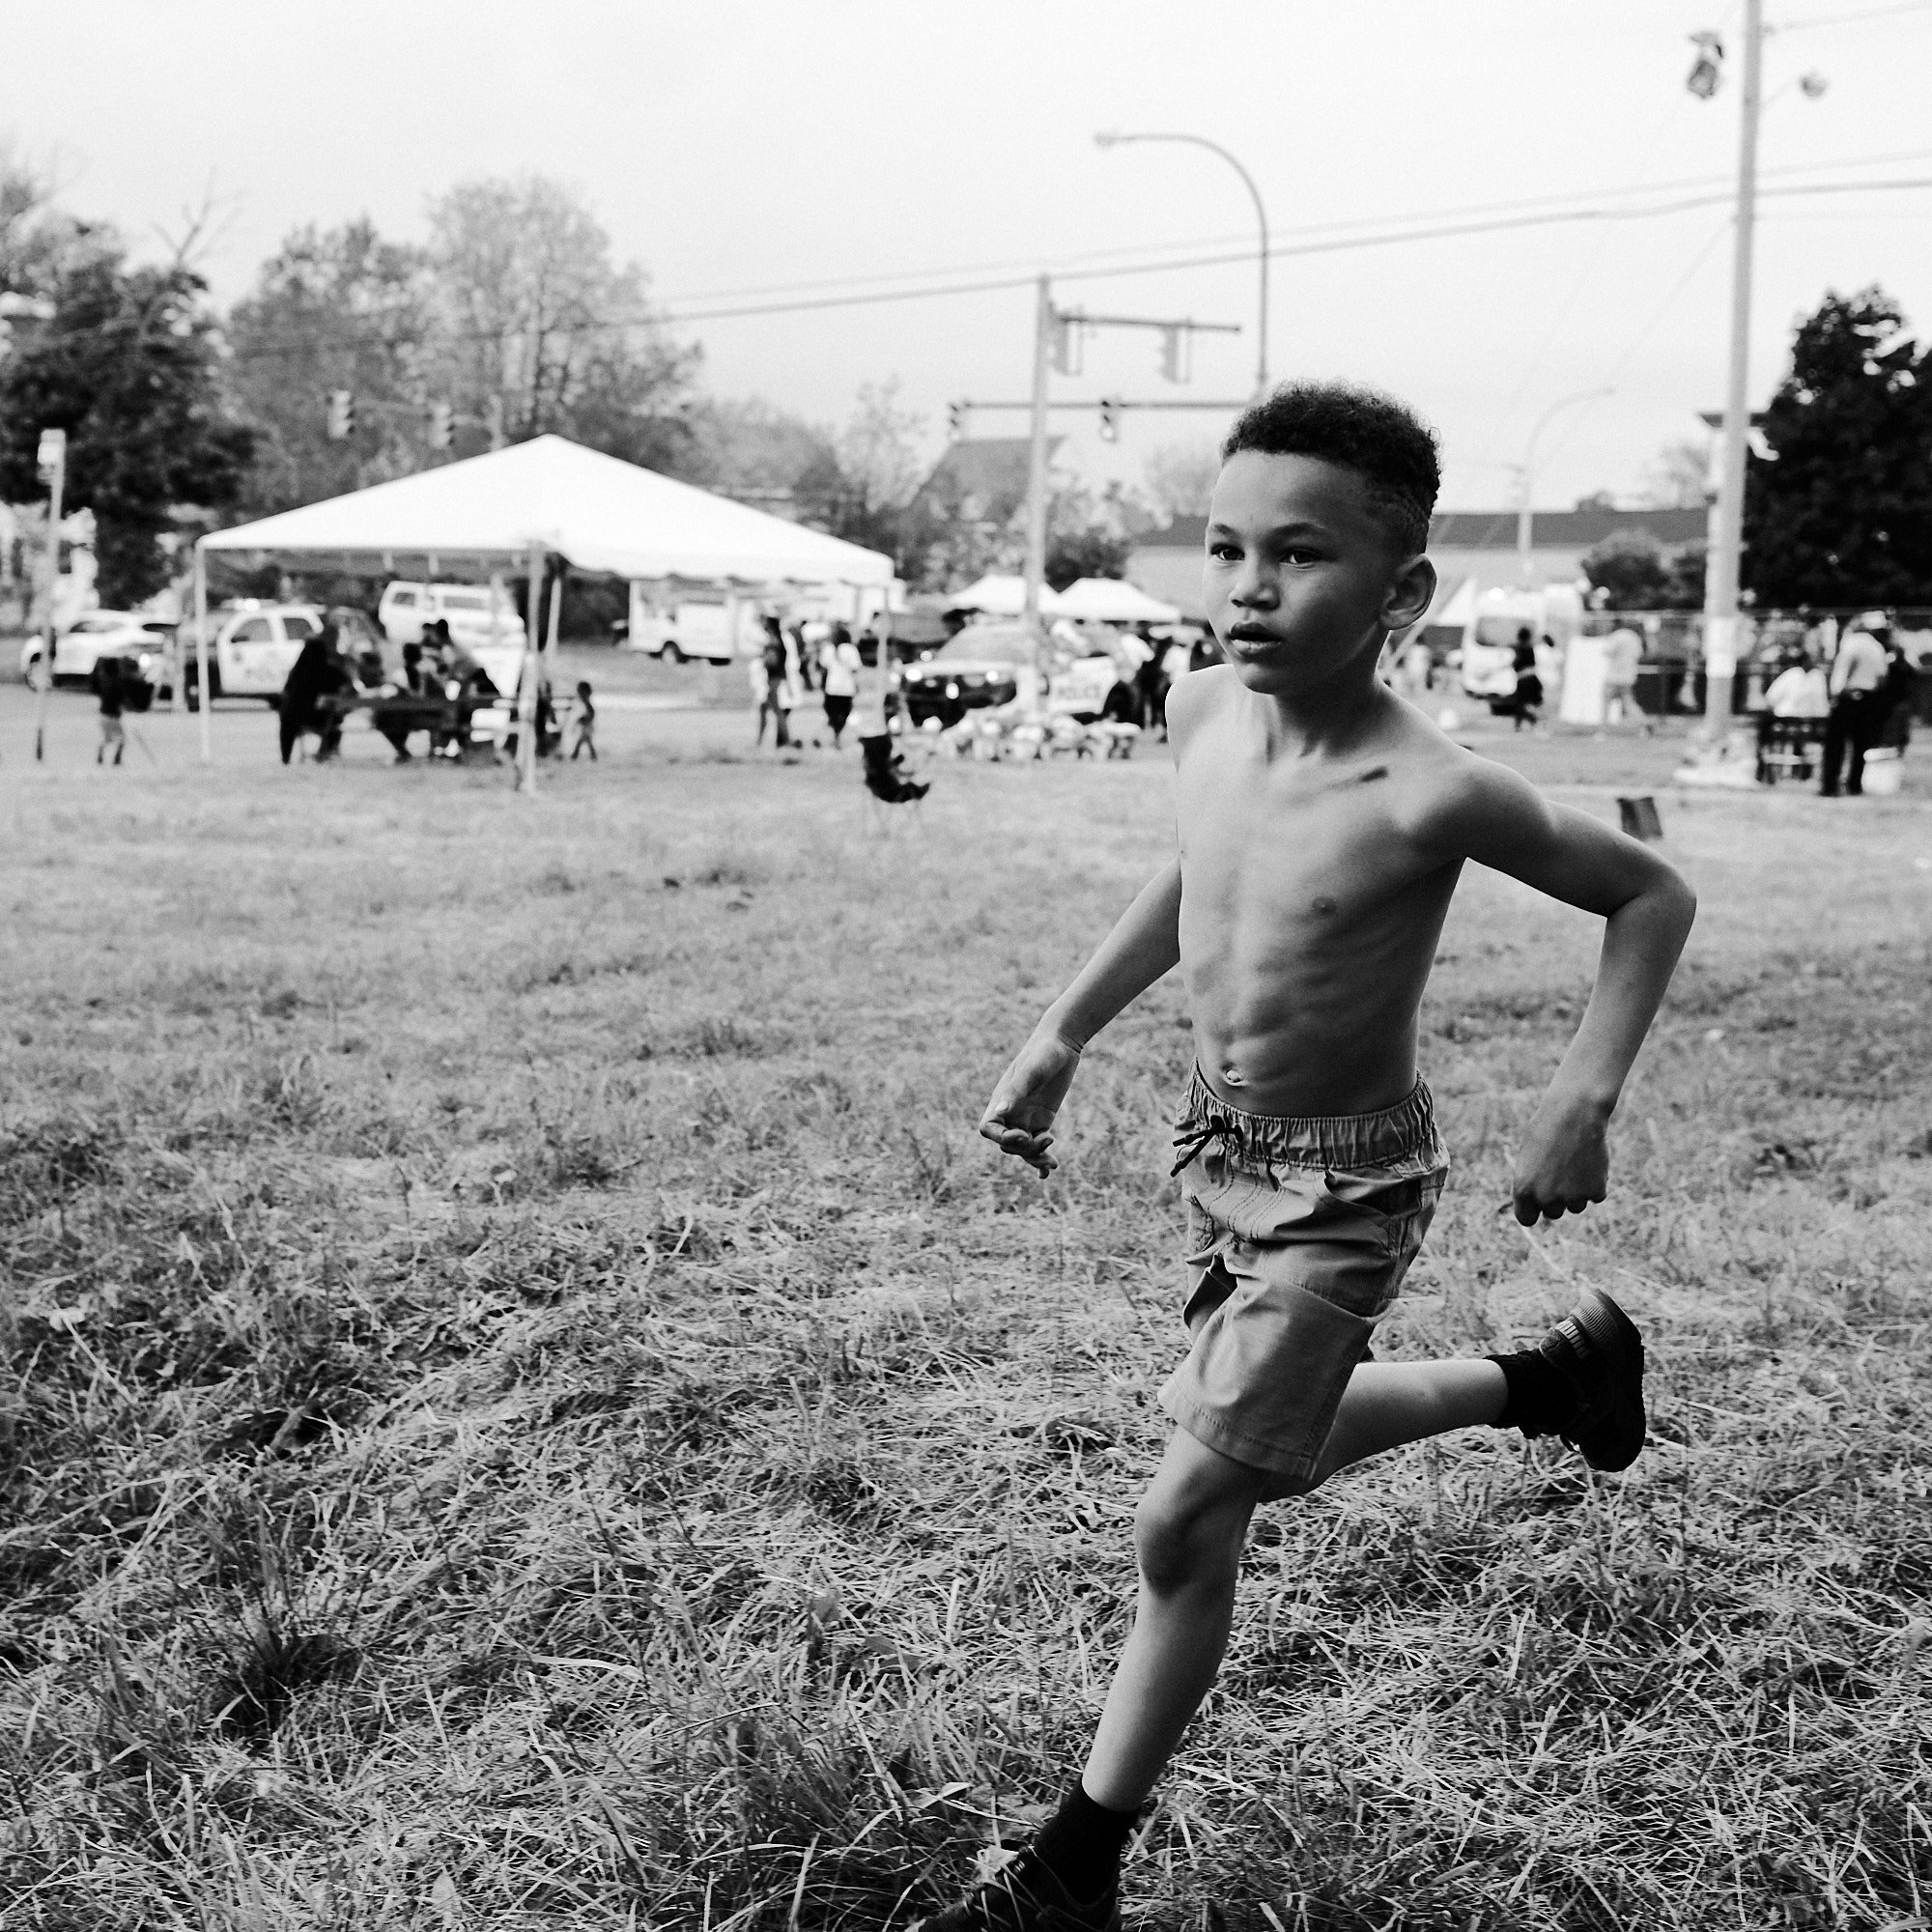   A week after the Buffalo Tops shooting, a young boy plays in the neighborhood of Cold Spring, near the Tops market on Jefferson Ave on in Buffalo, N.Y. on May 21, 2022.   